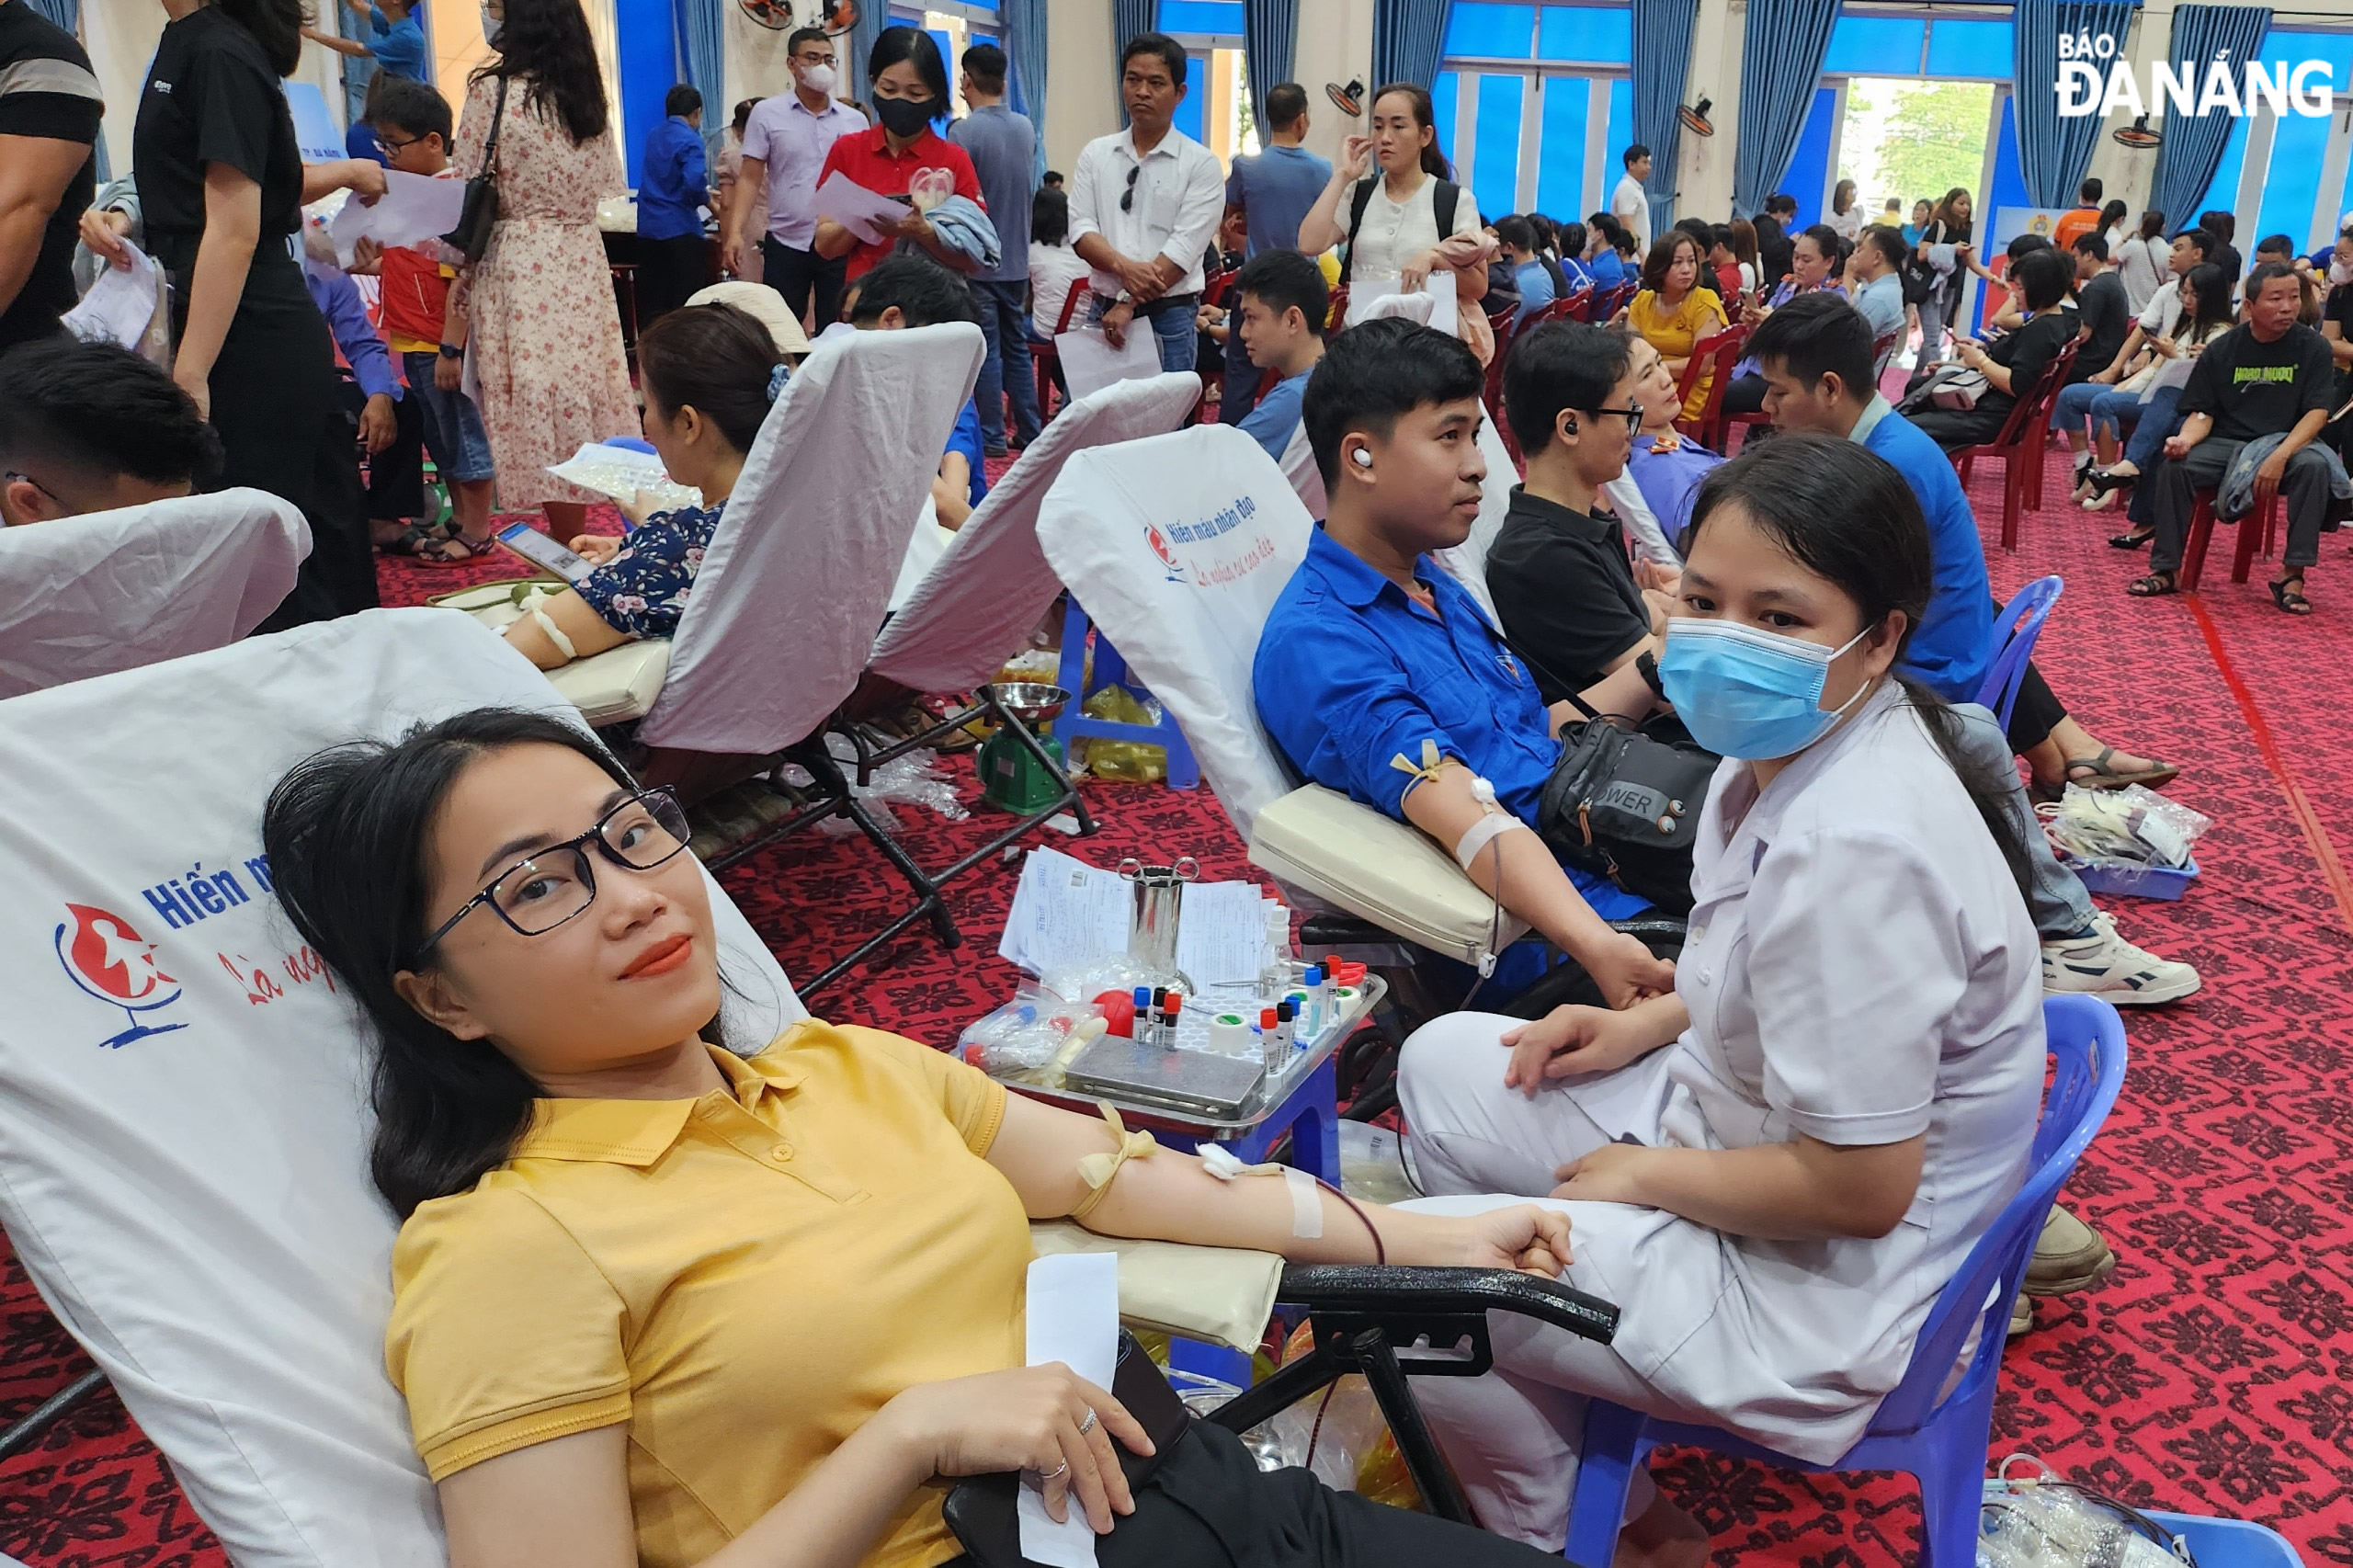 A member of the Da Nang Newspaper's Trade Union organisation participating in the voluntary blood donation festival. Photo: LE HUNG